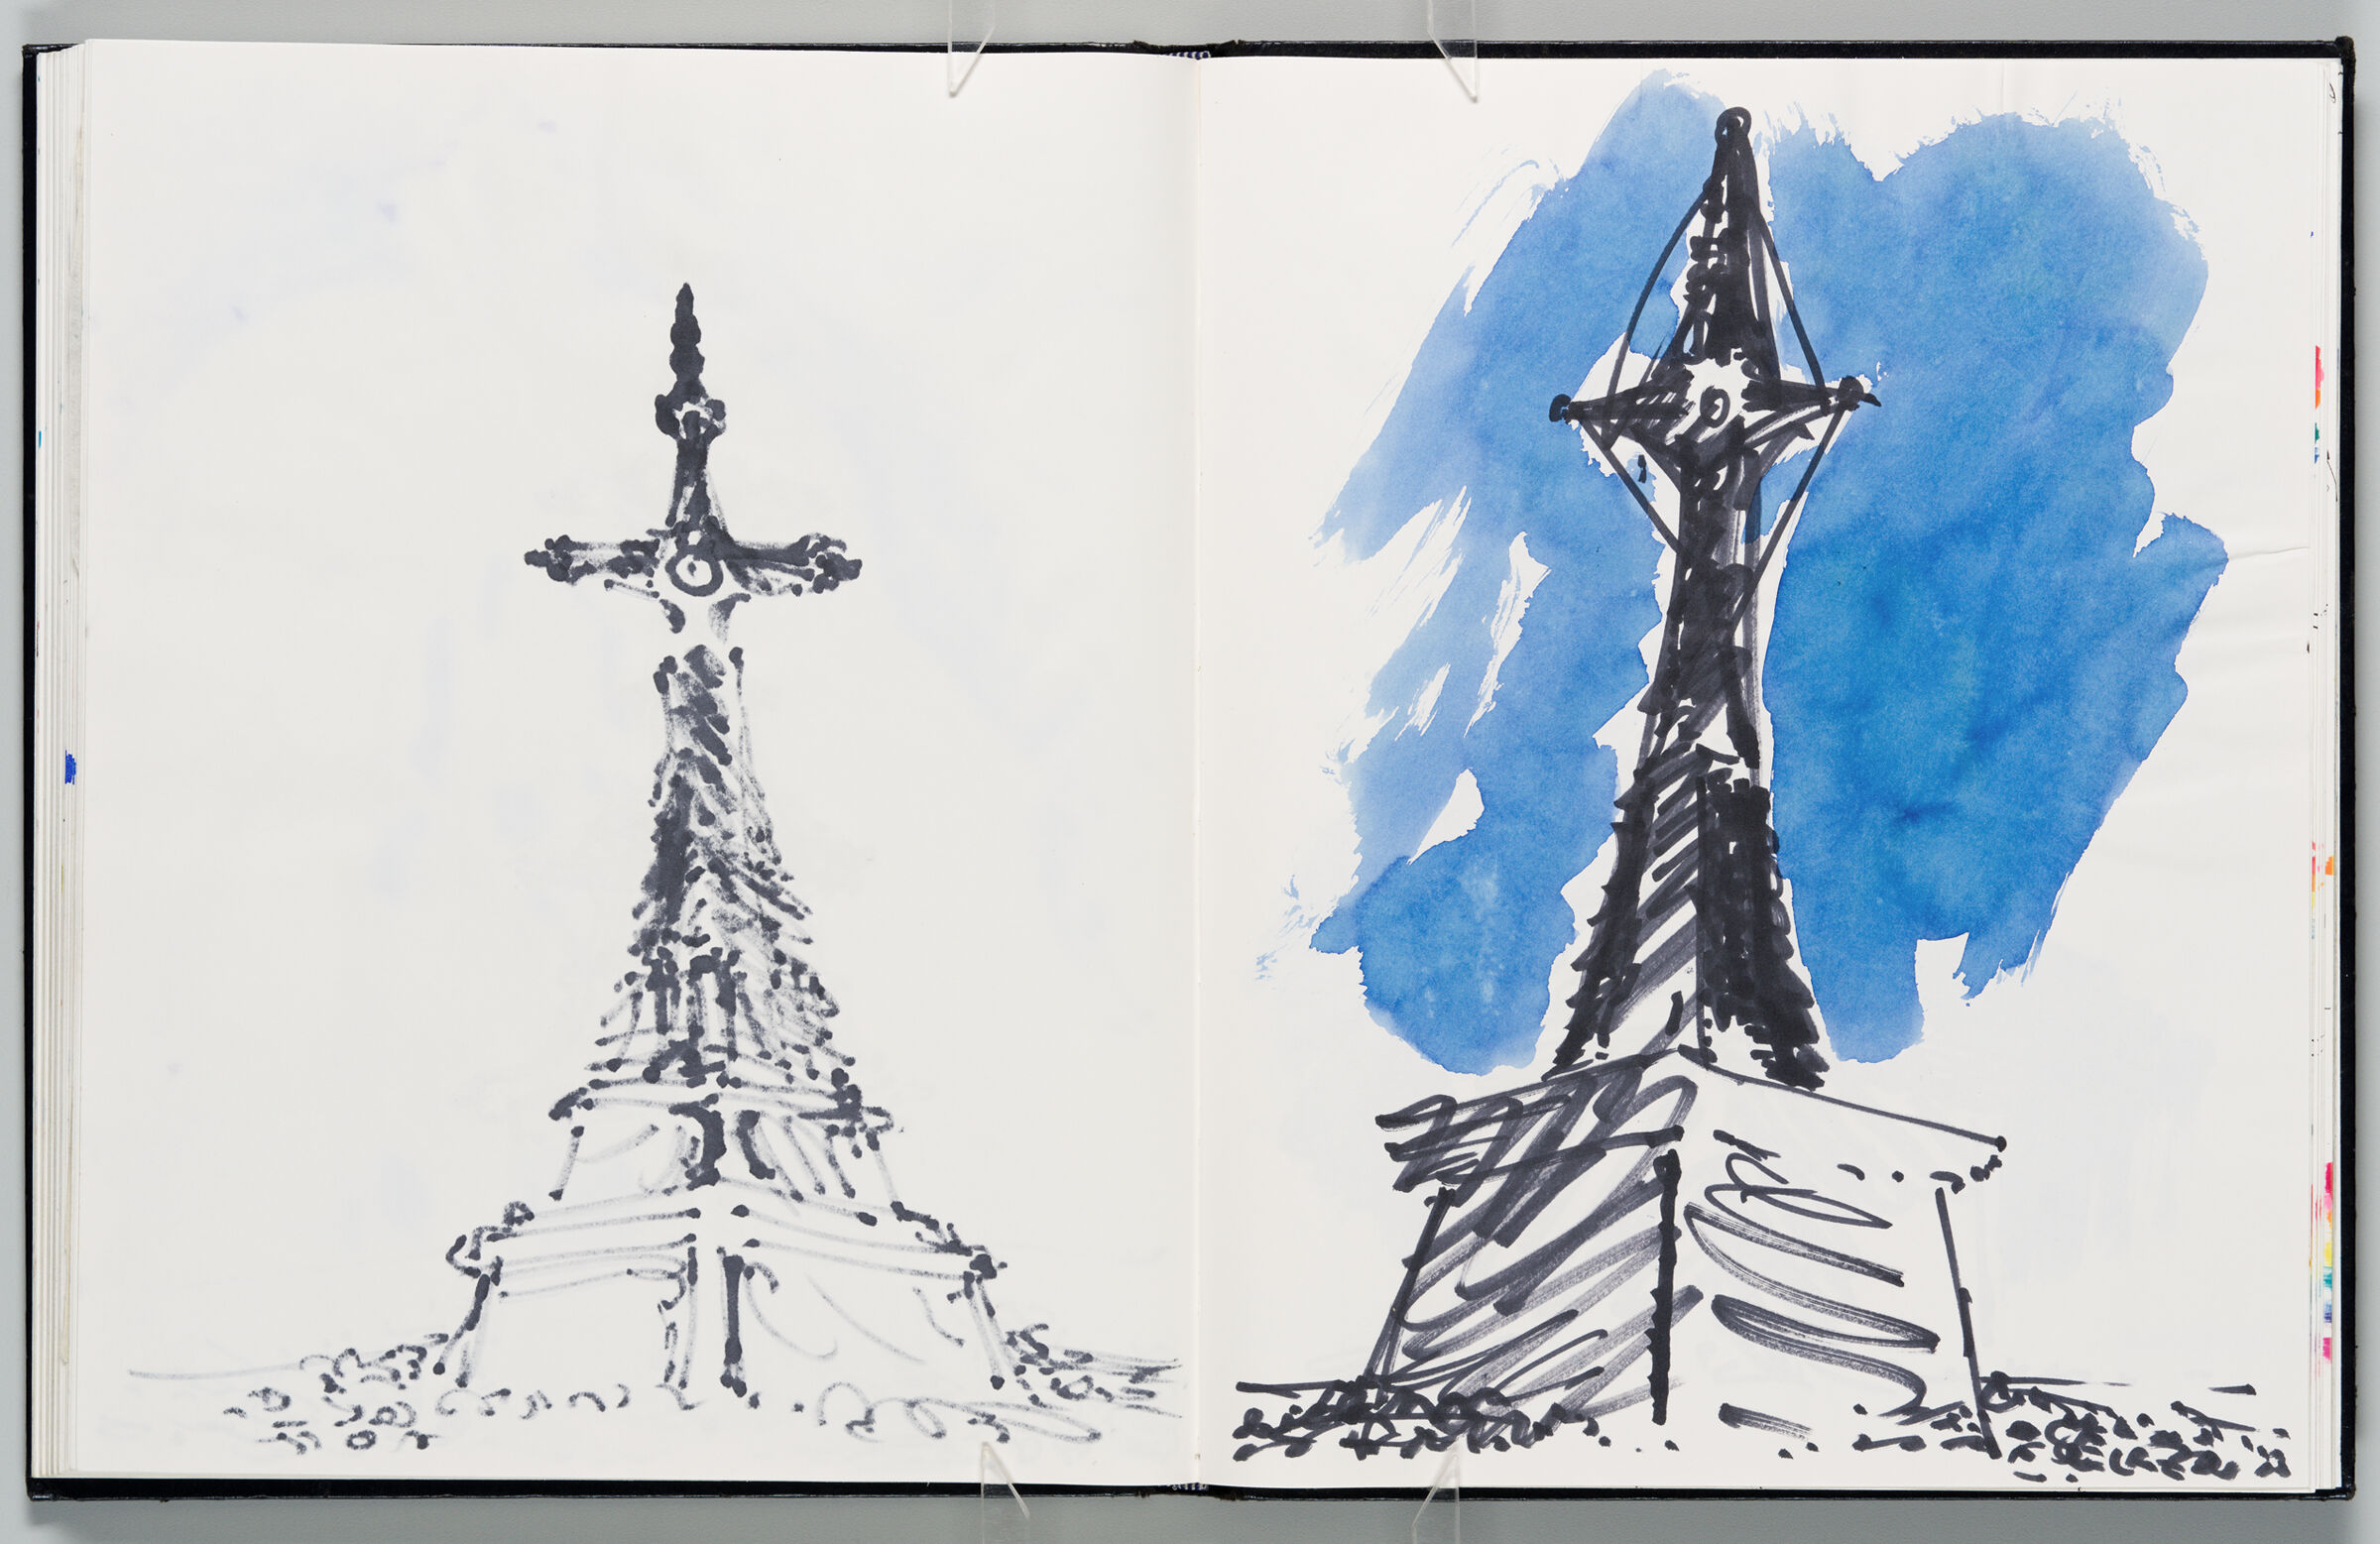 Untitled (Bleed-Through Of Previous Page With Color Transfer, Left Page); Untitled (St. Véran, Right Page)